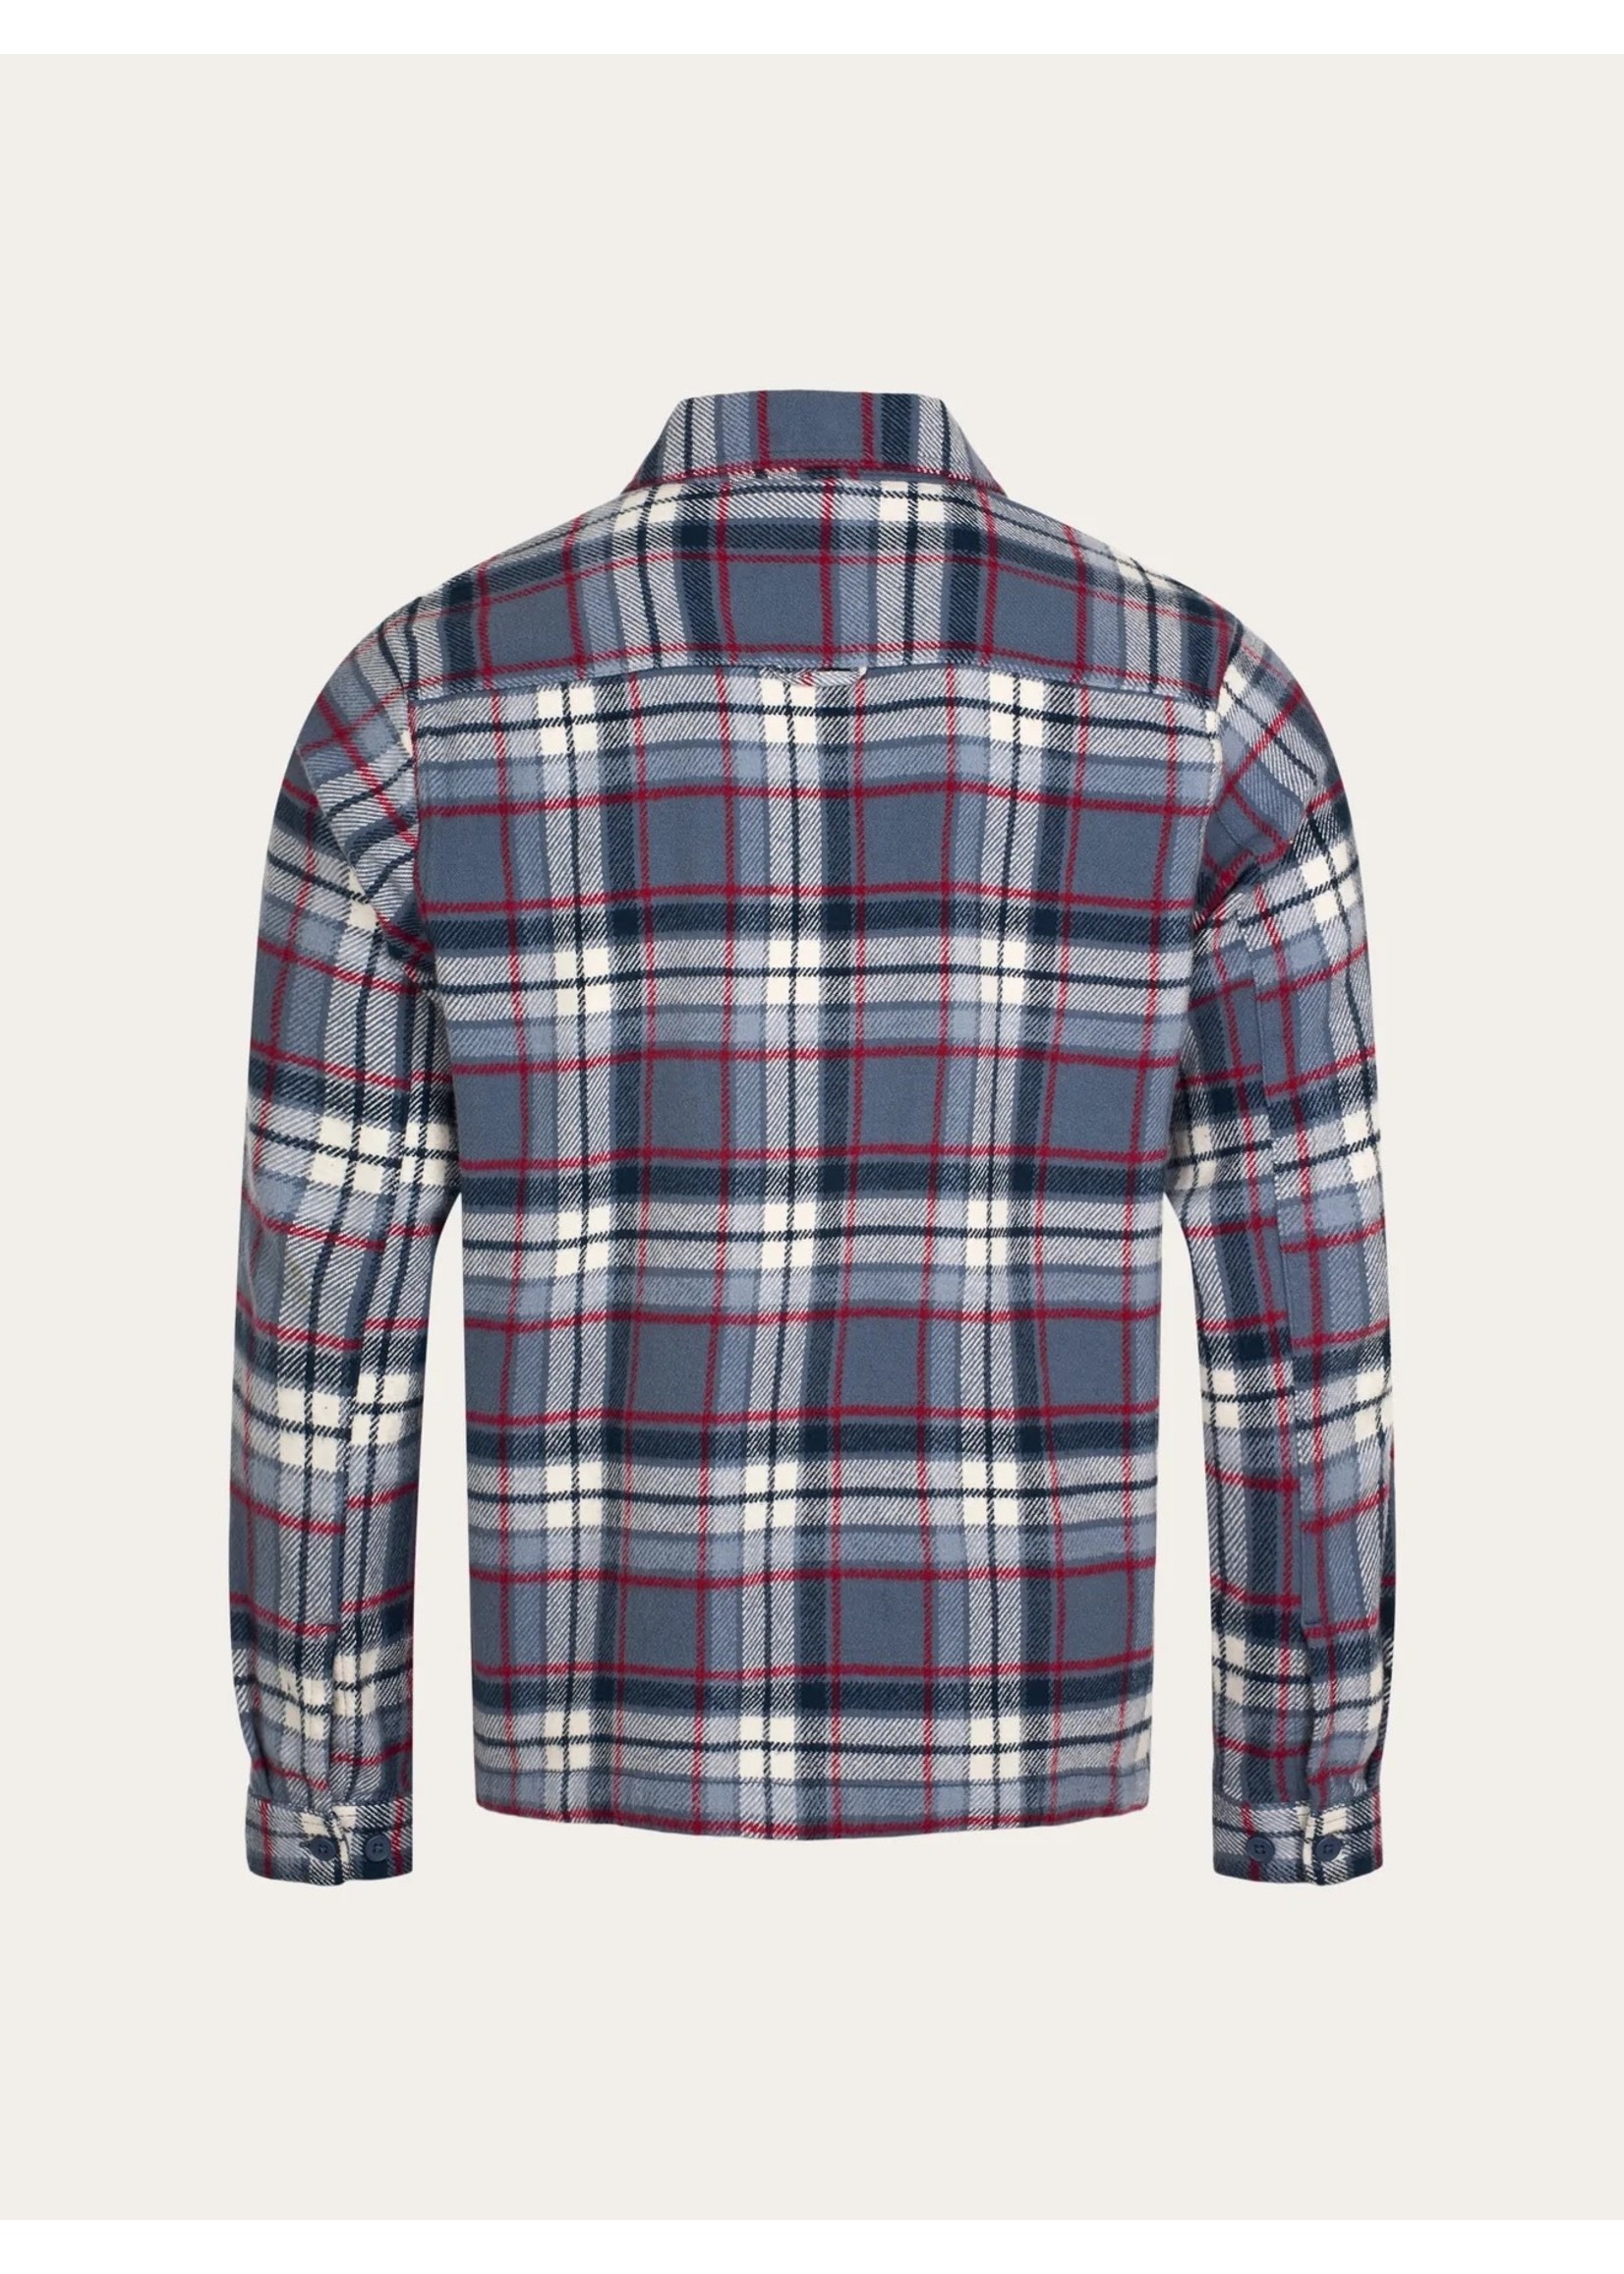 KnowledgeCotton KnowledgeCotton Big Checked Heavy Flannel Overshirt - China Blue